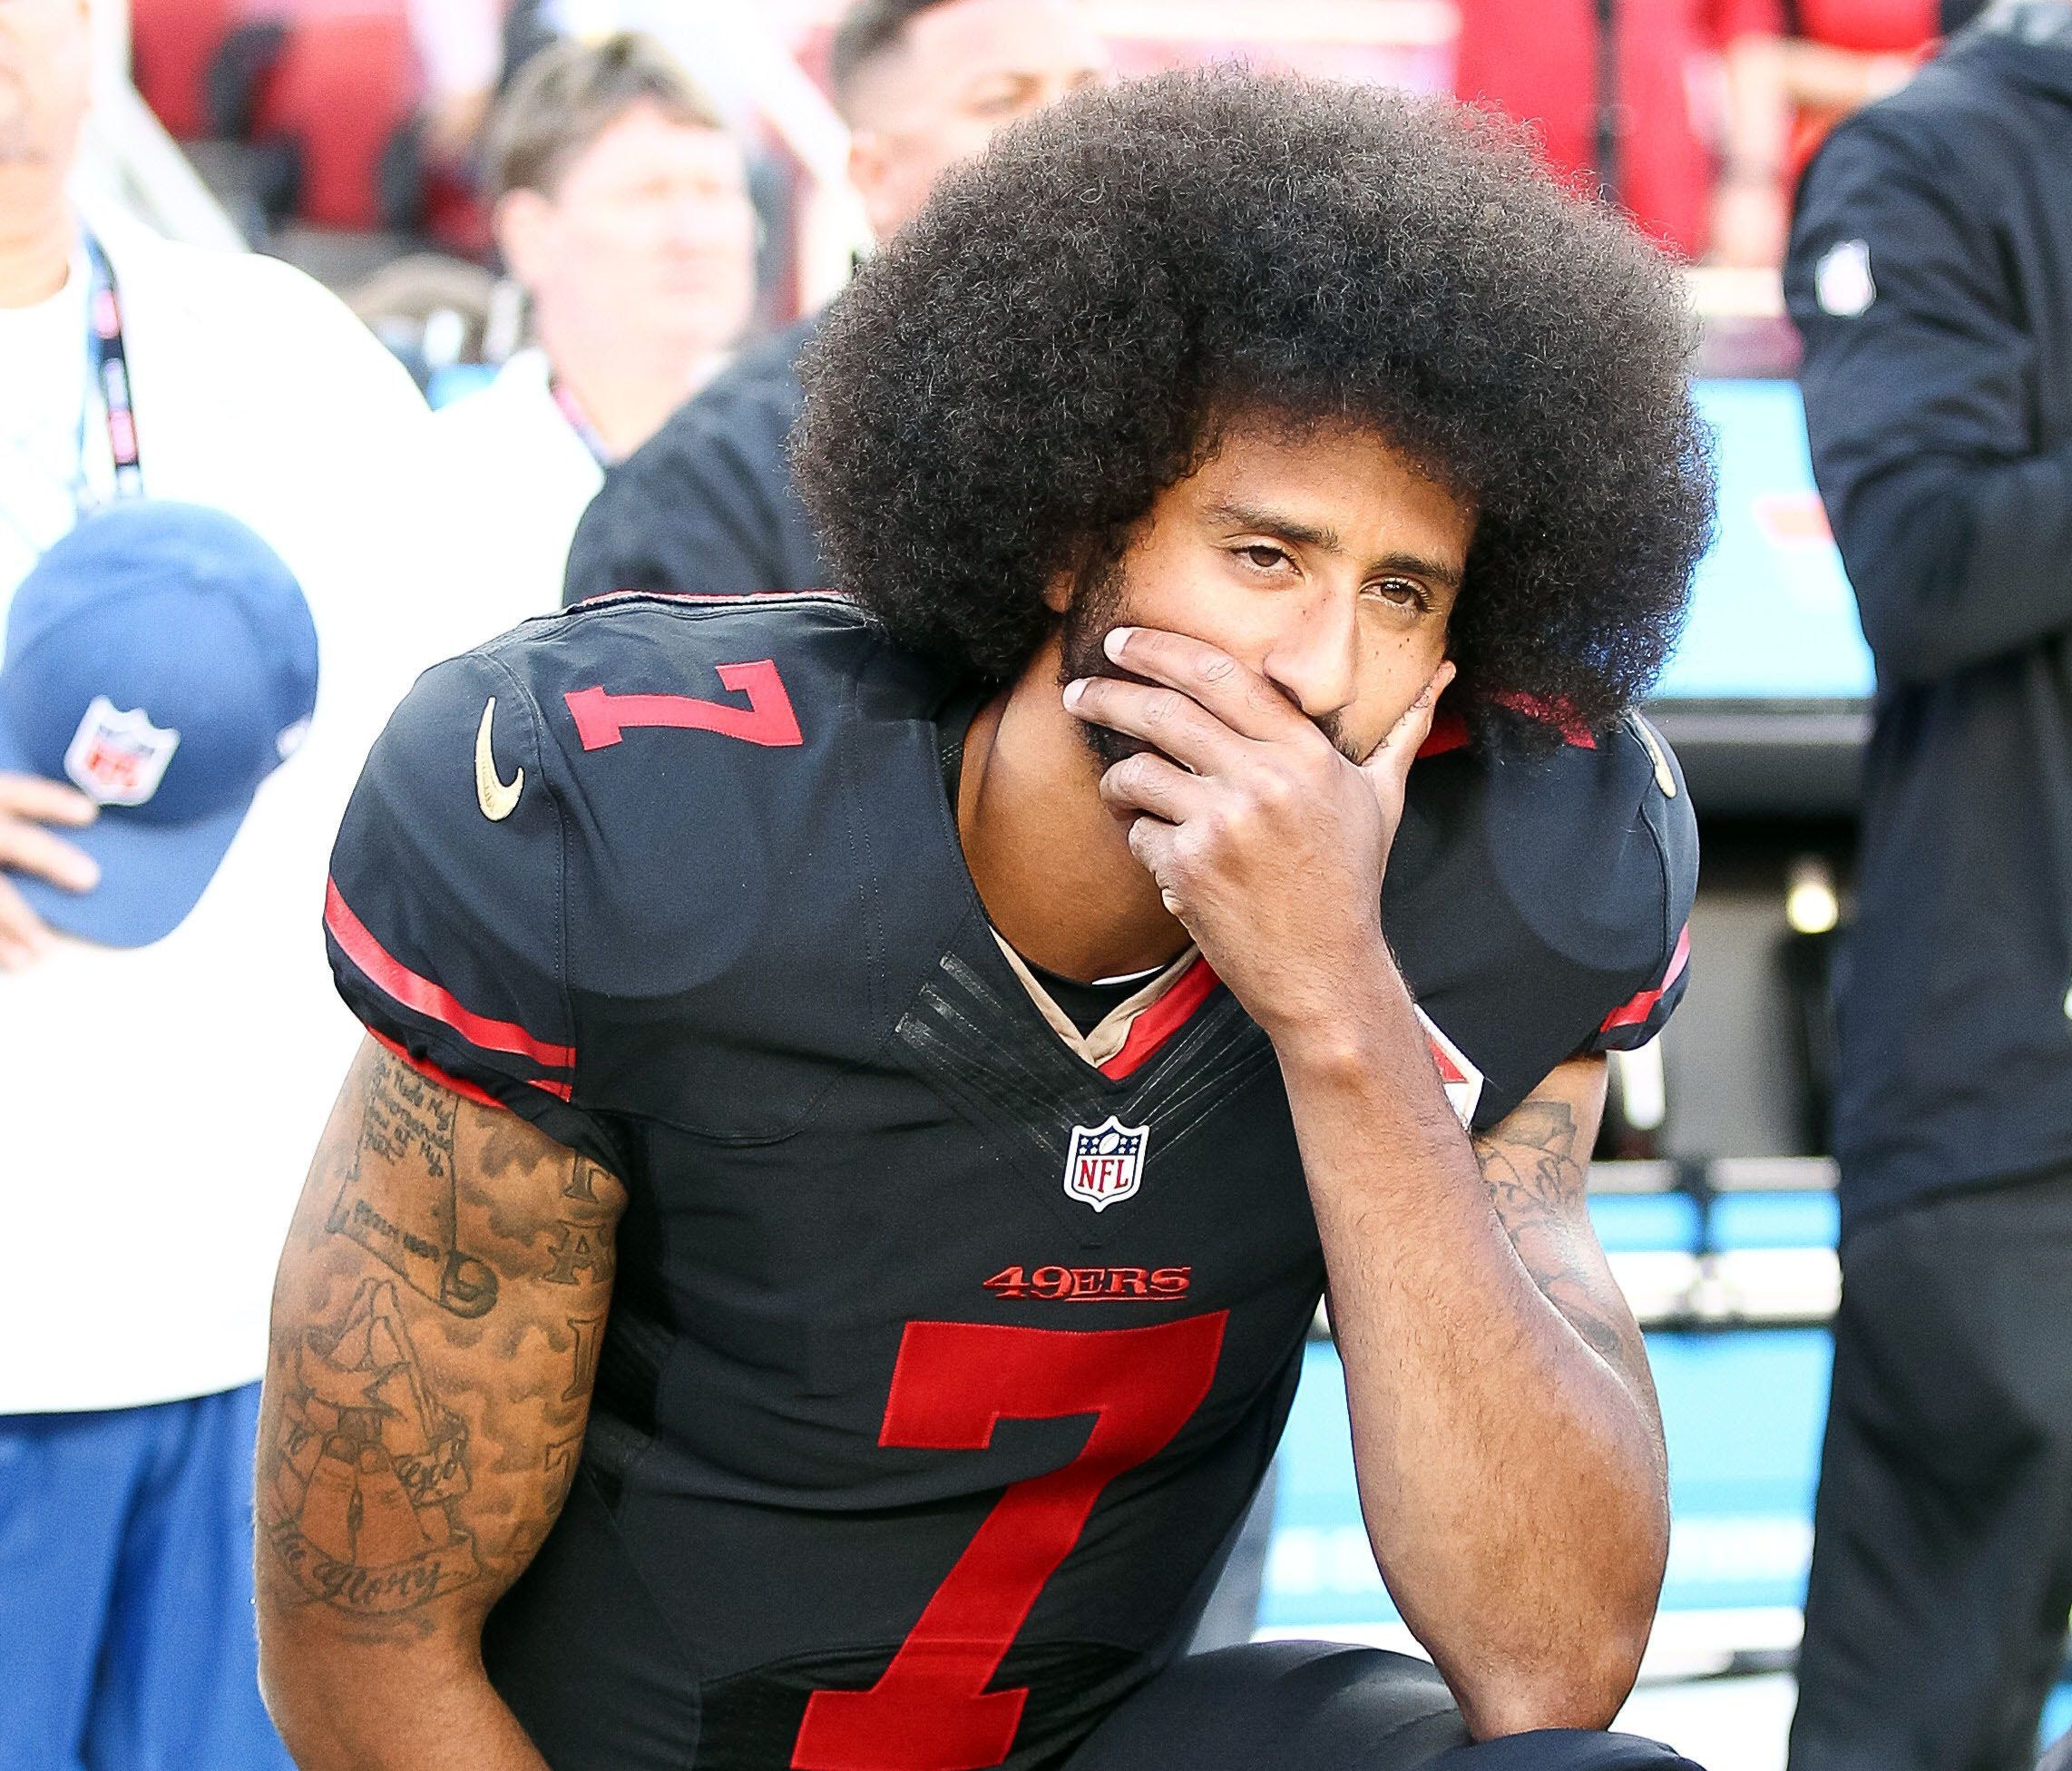 When will Colin Kaepernick lend his voice to the ongoing debate within the NFL on how best to highlight and address social injustice?